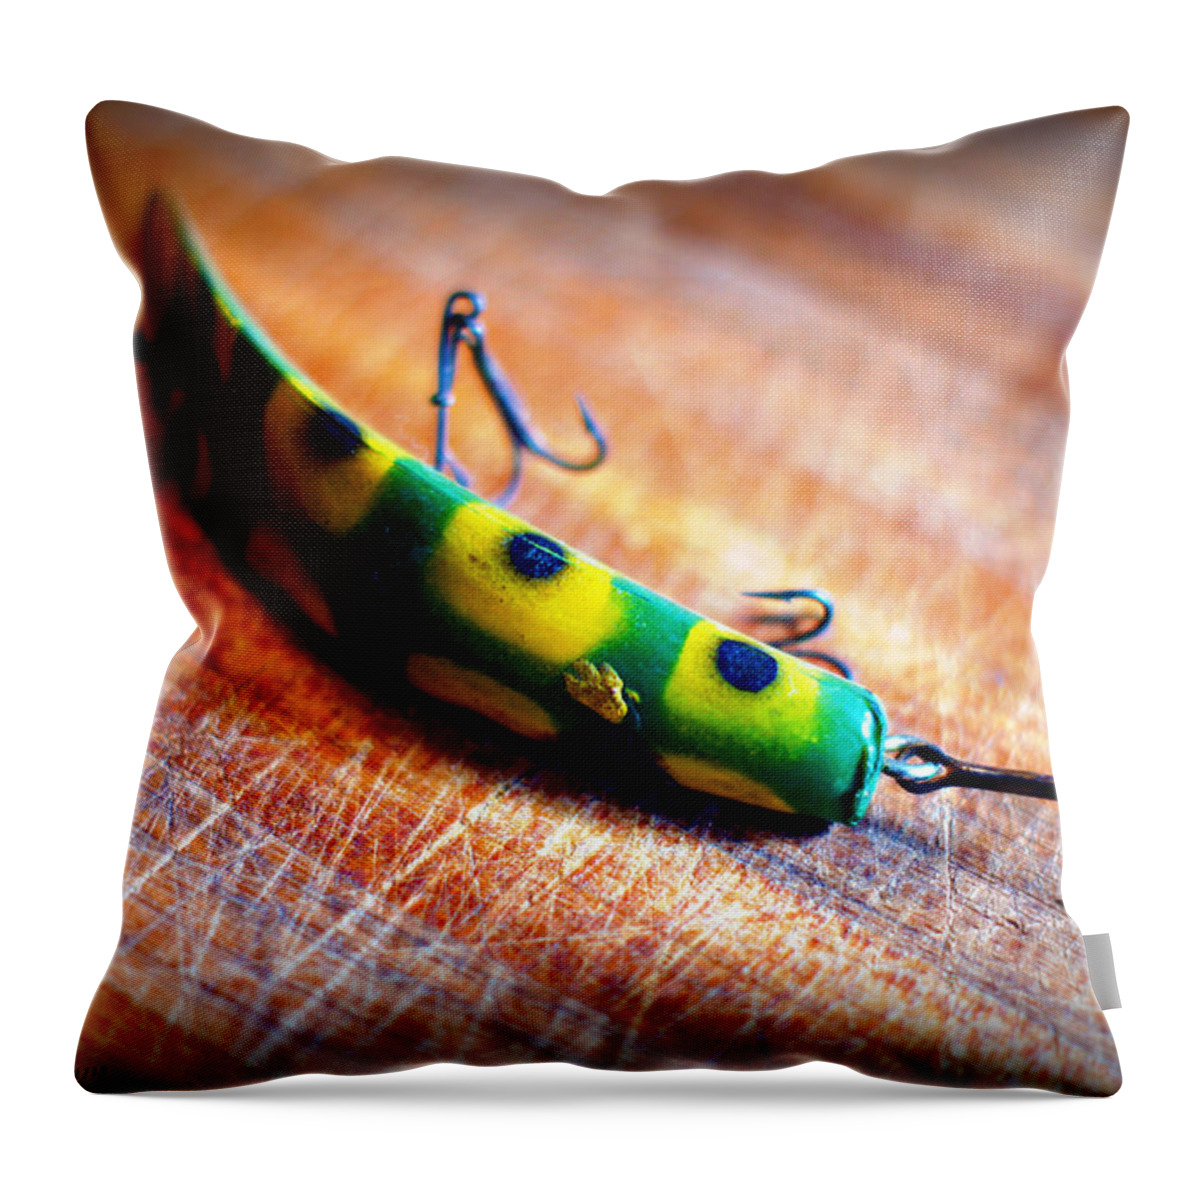 Fishing Throw Pillow featuring the photograph Grandpa's Lure by Cricket Hackmann